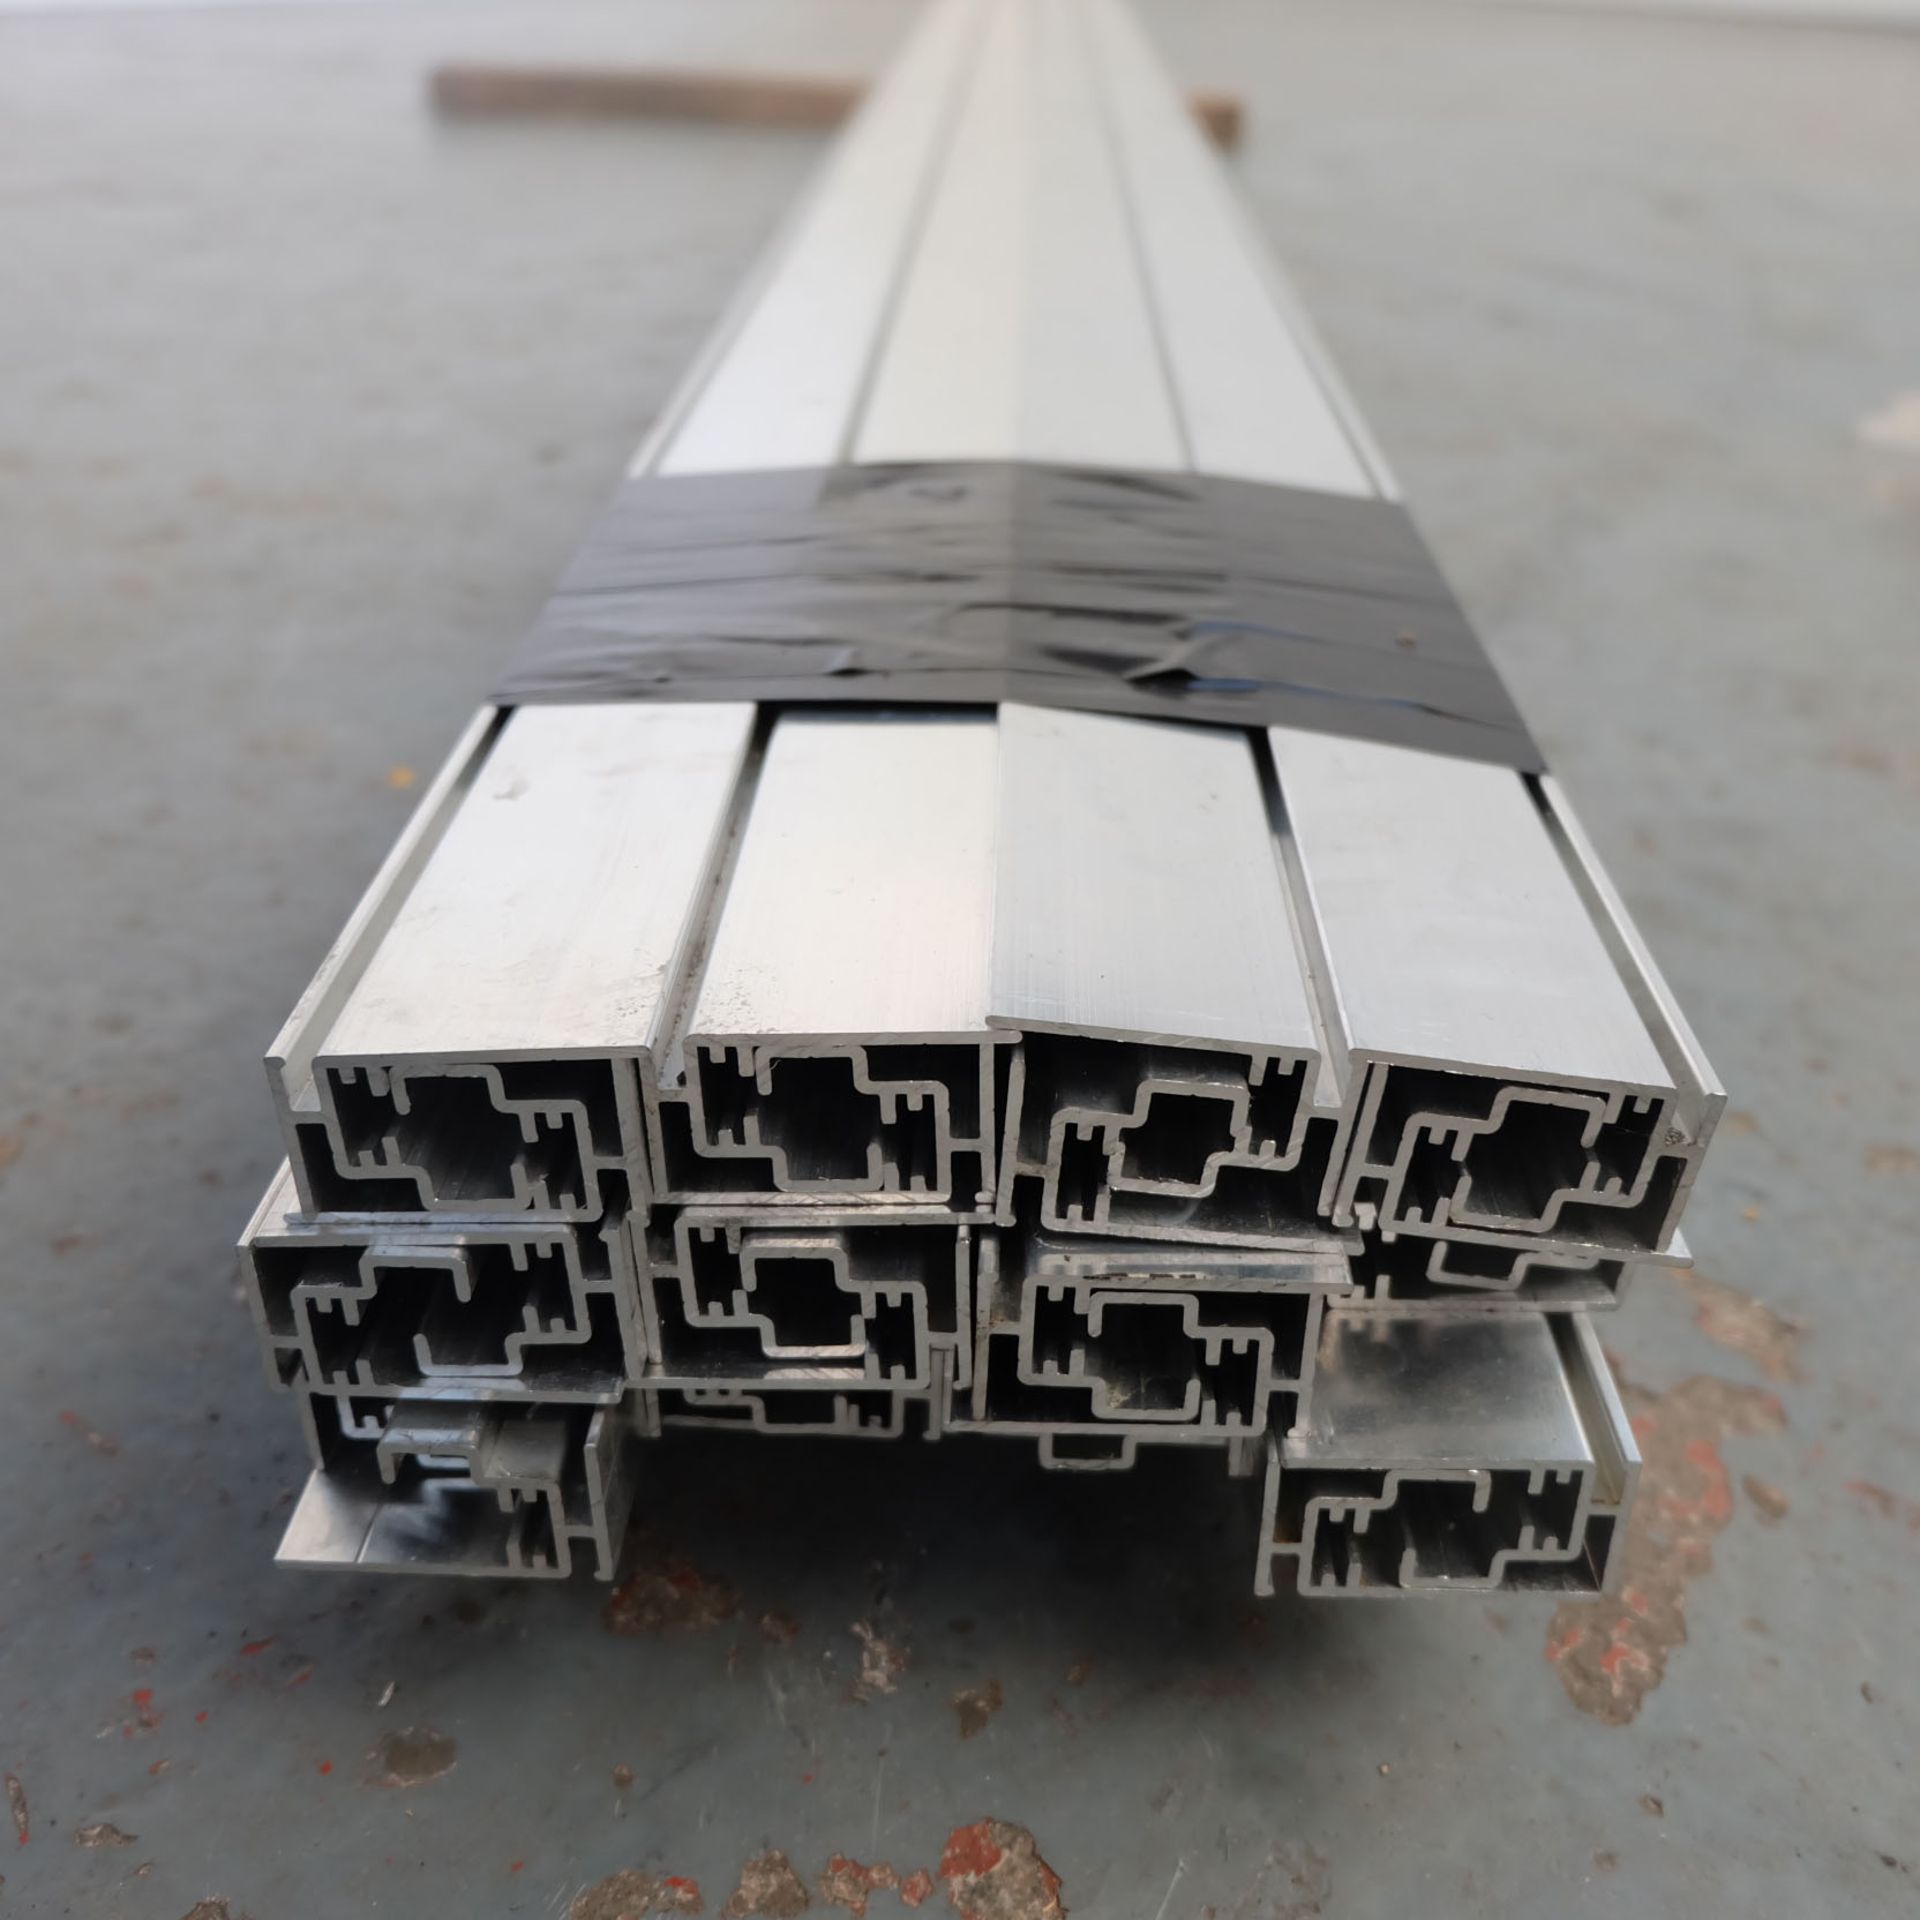 24 Lengths of Aluminium Extrusions. - Image 2 of 4